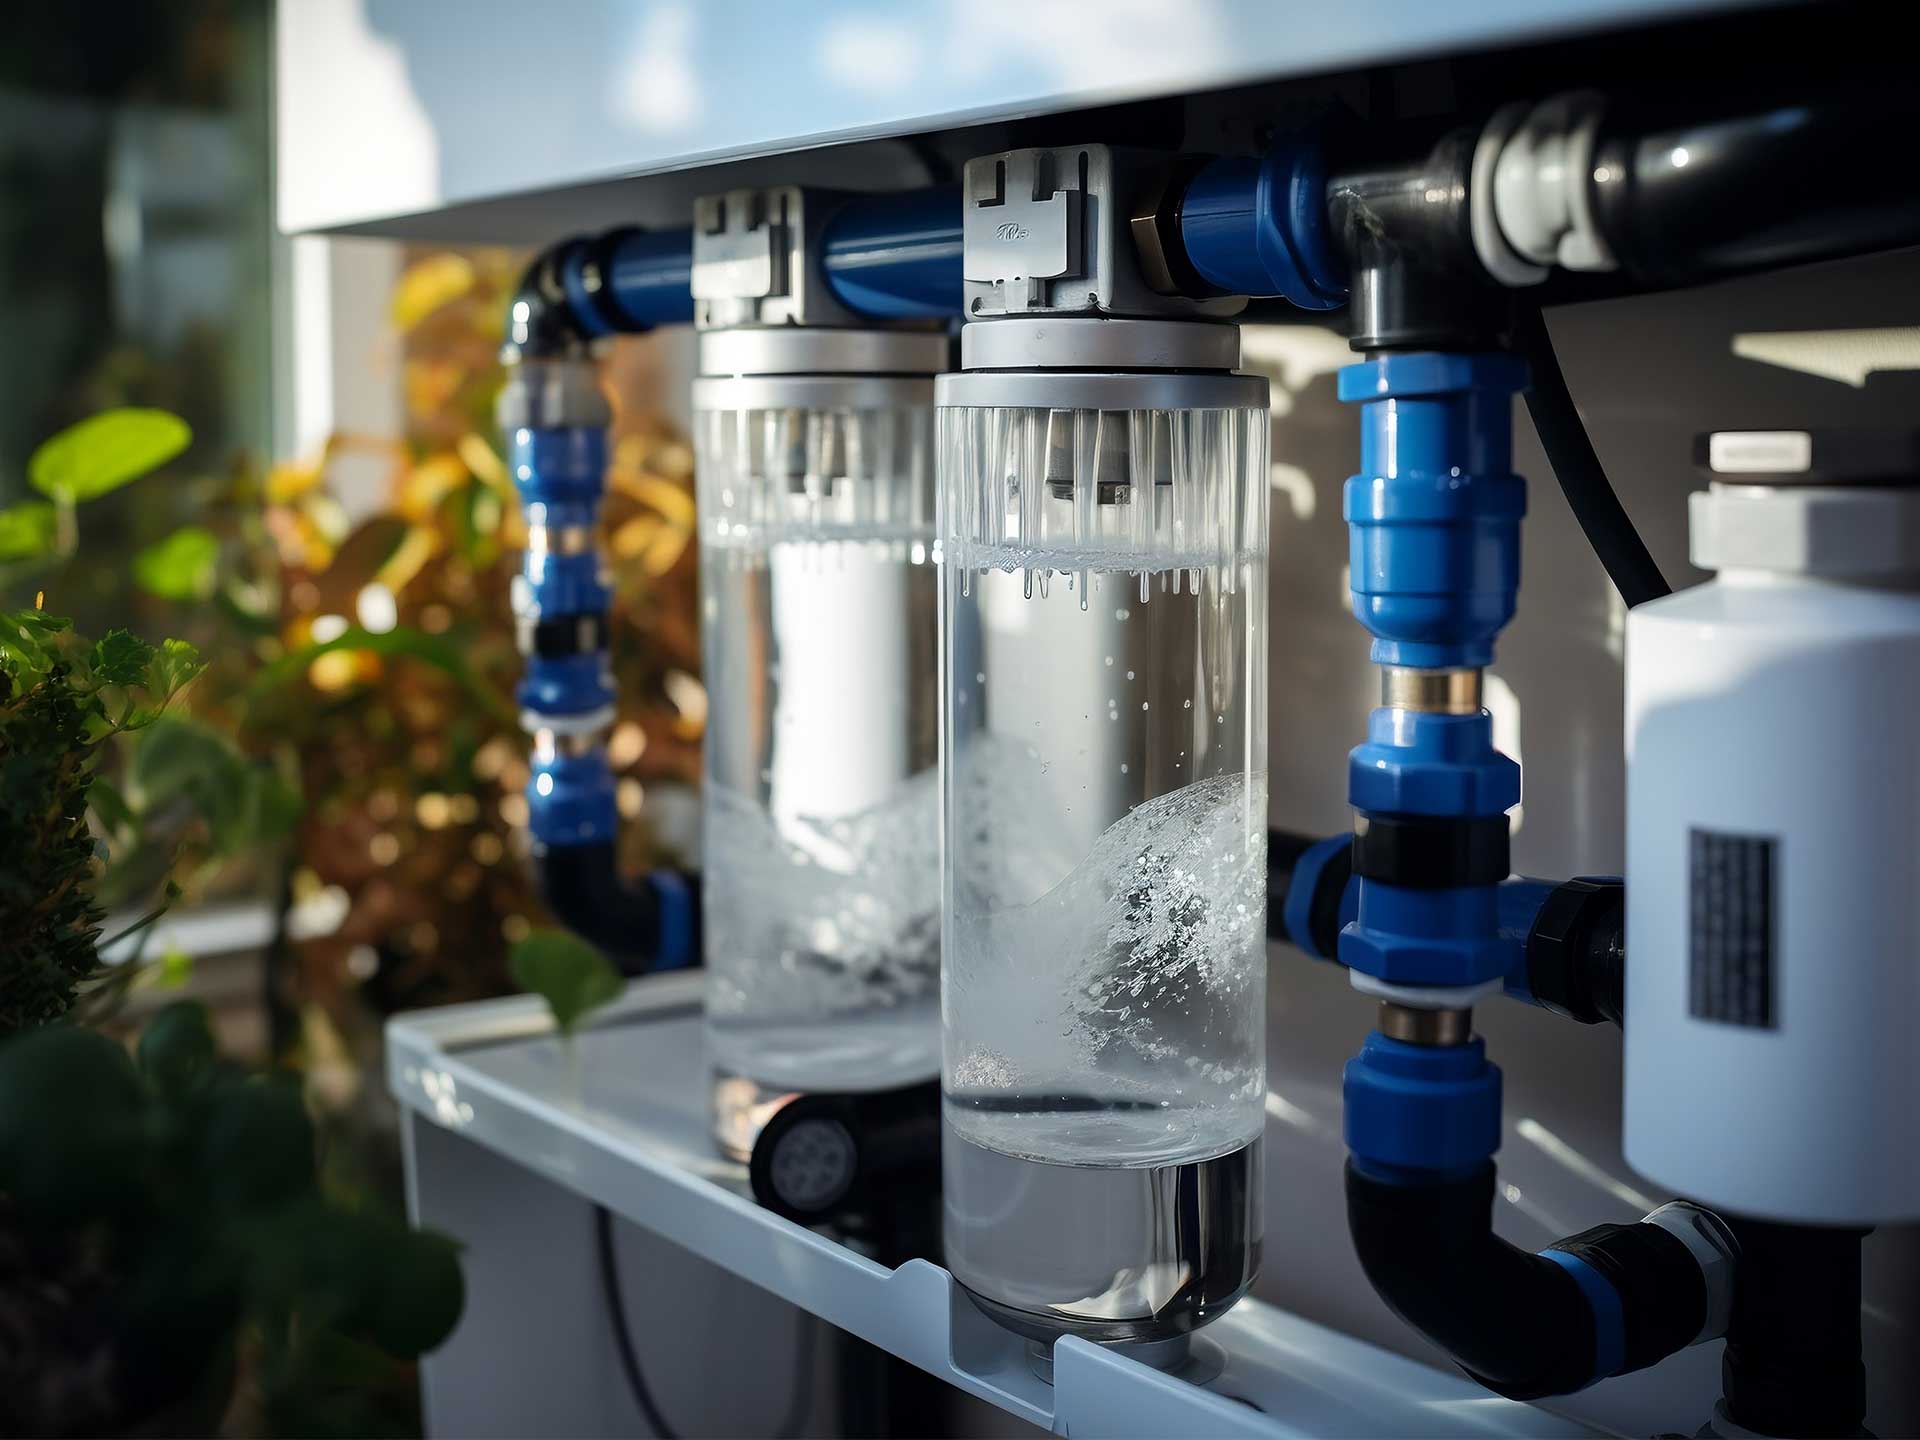 Installing a water softener in your home comes with a myriad of benefits